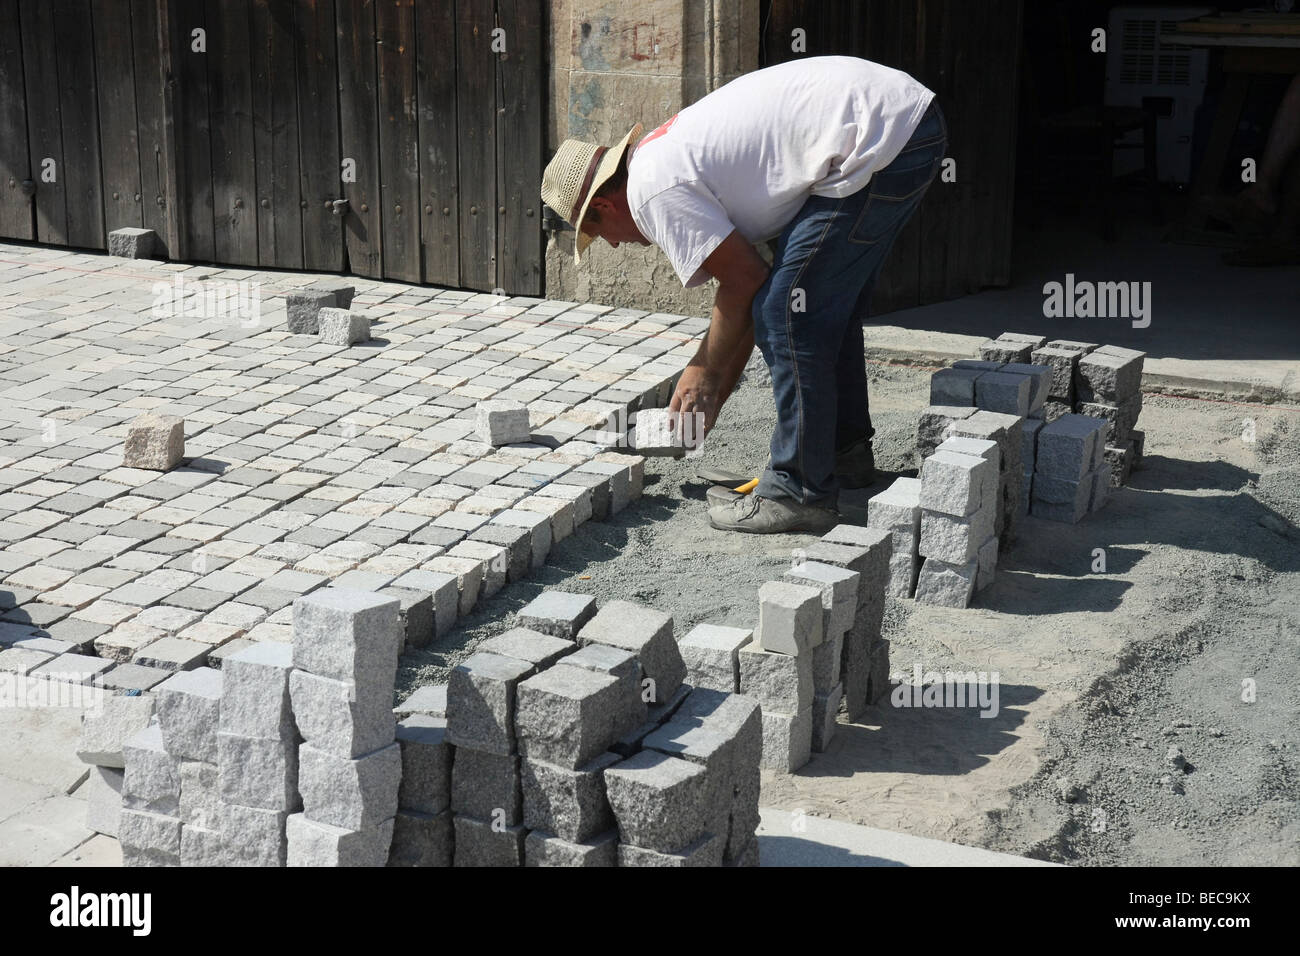 Man building a street with cubic paving stones, Larnaca, Cyprus. Stock Photo